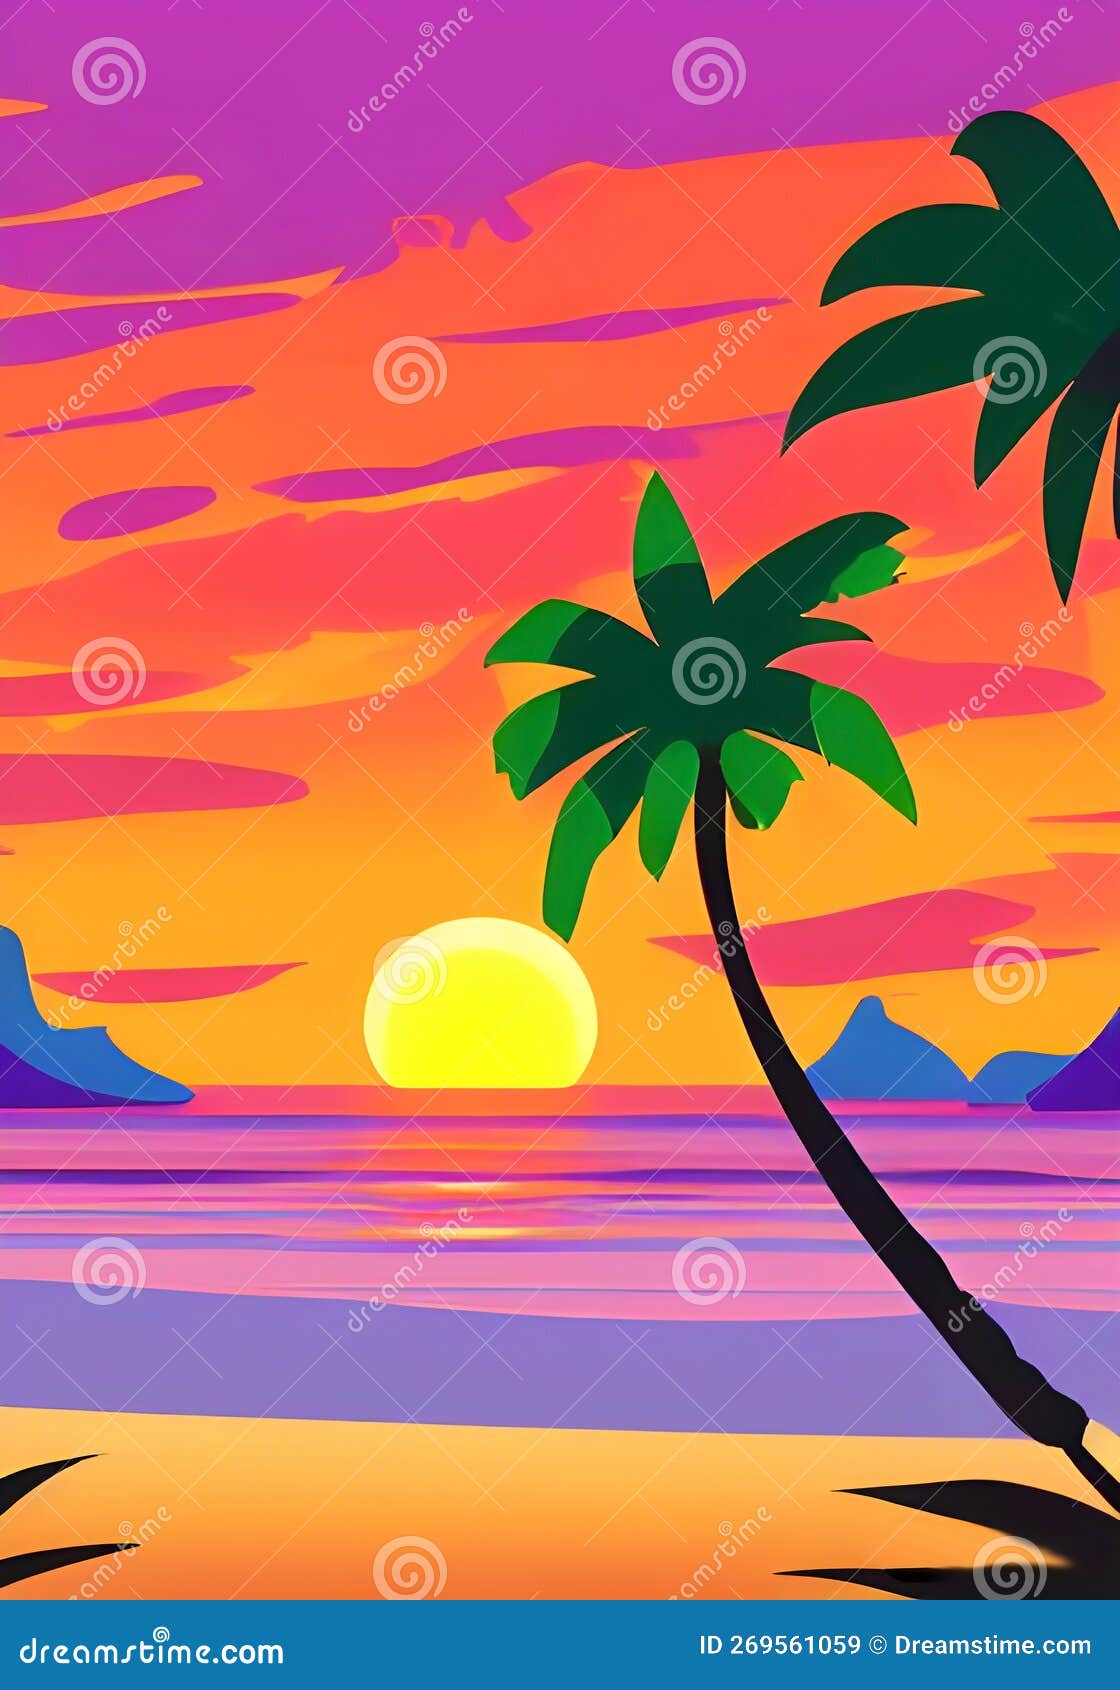 Illustrated Sunset Oasis Beachscape with Twilight Palms Stock ...